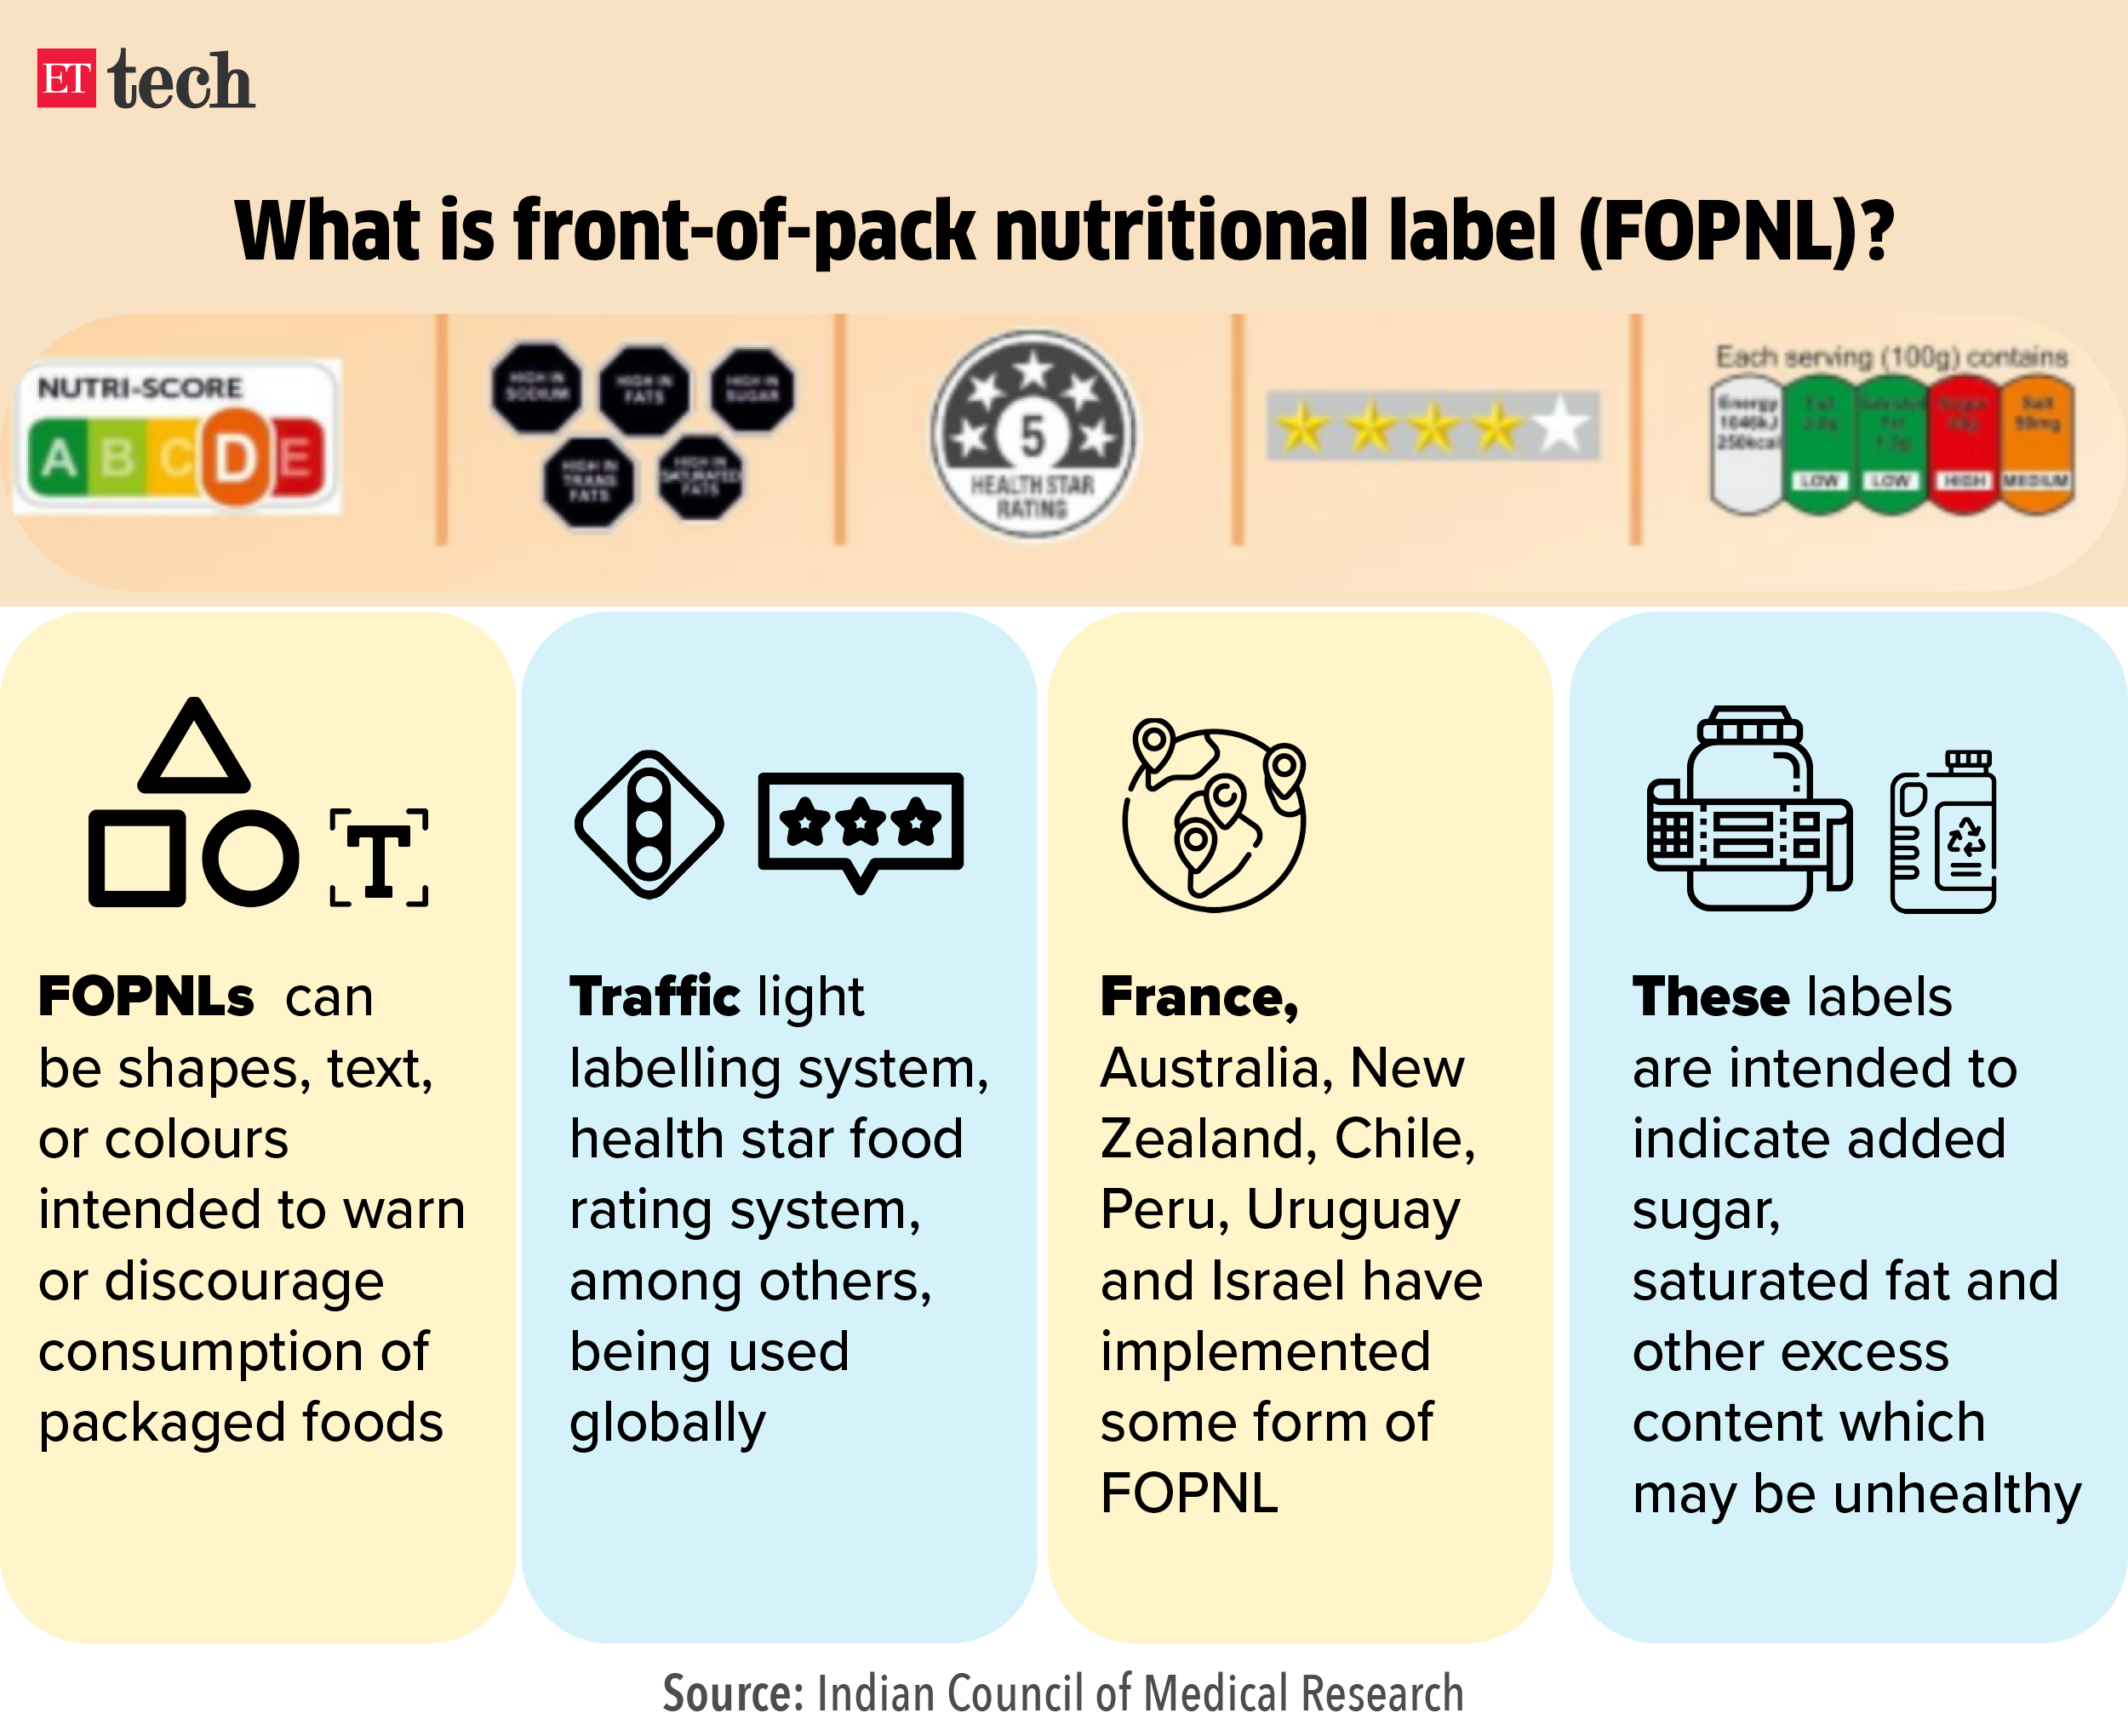 What is front-of-pack nutritional label